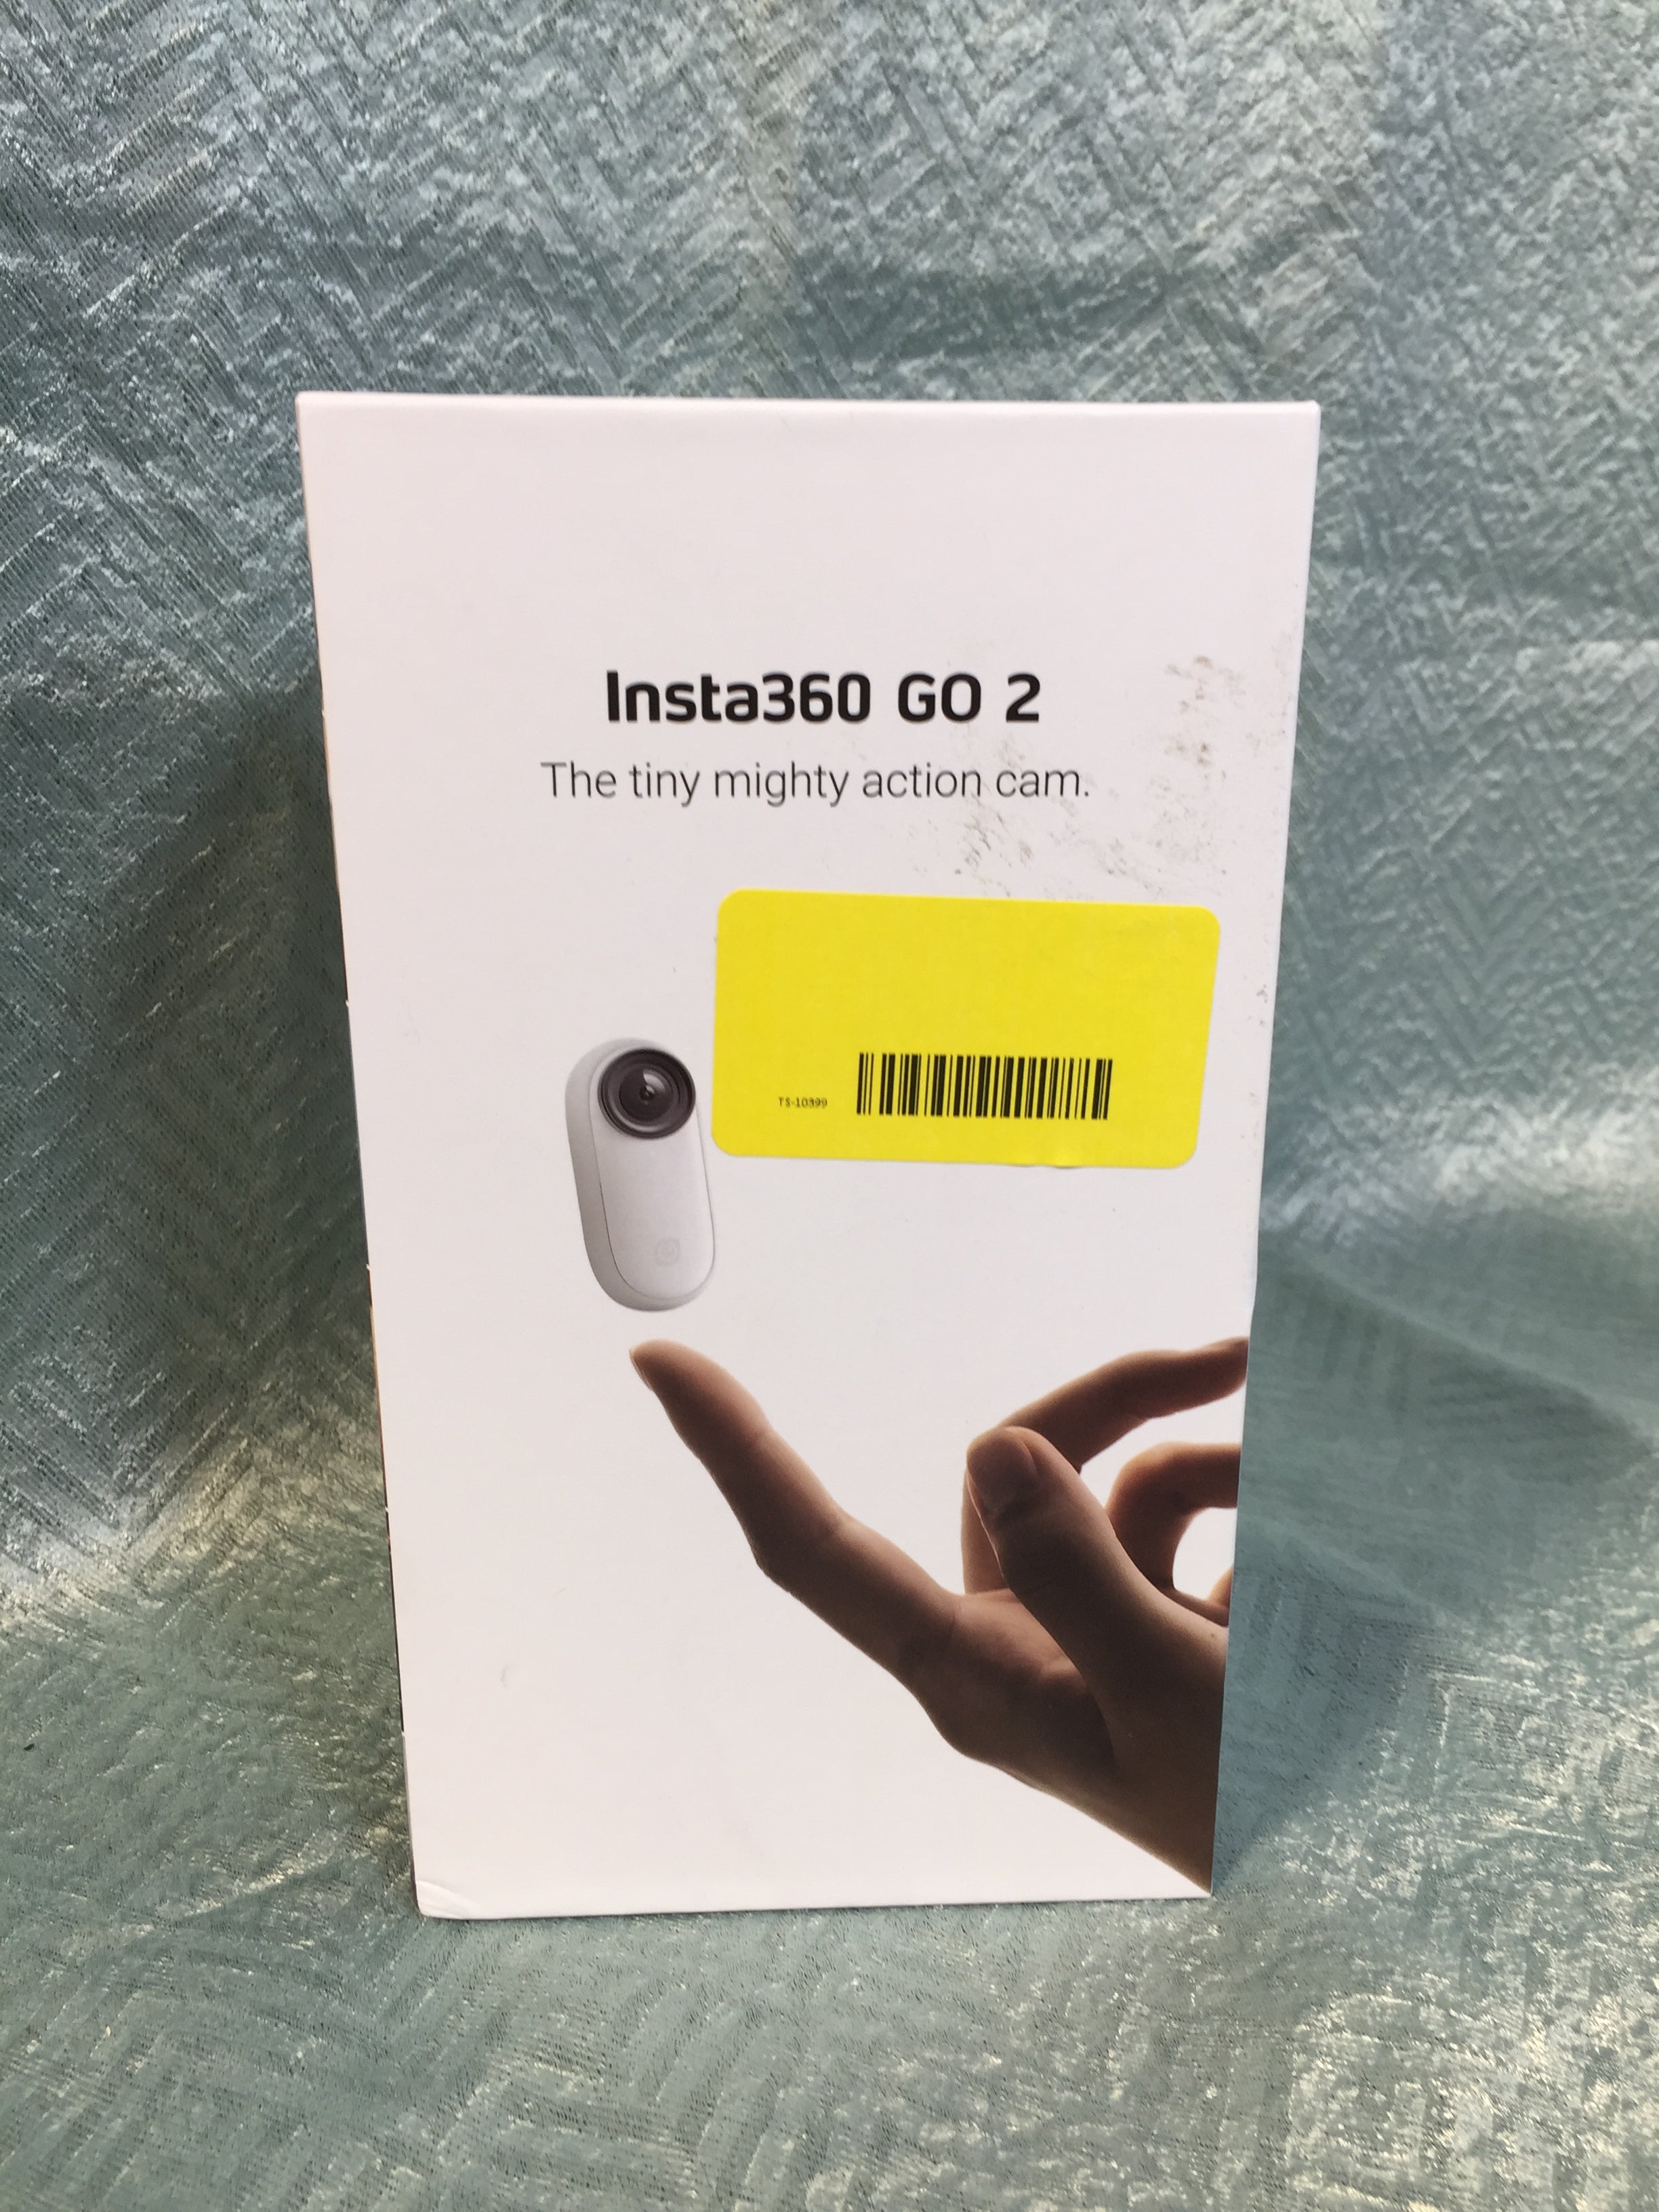 Insta360 GO 2 – Small Action Camera, Weighs 1 oz, Waterproof, Stabilization (7498436247790)